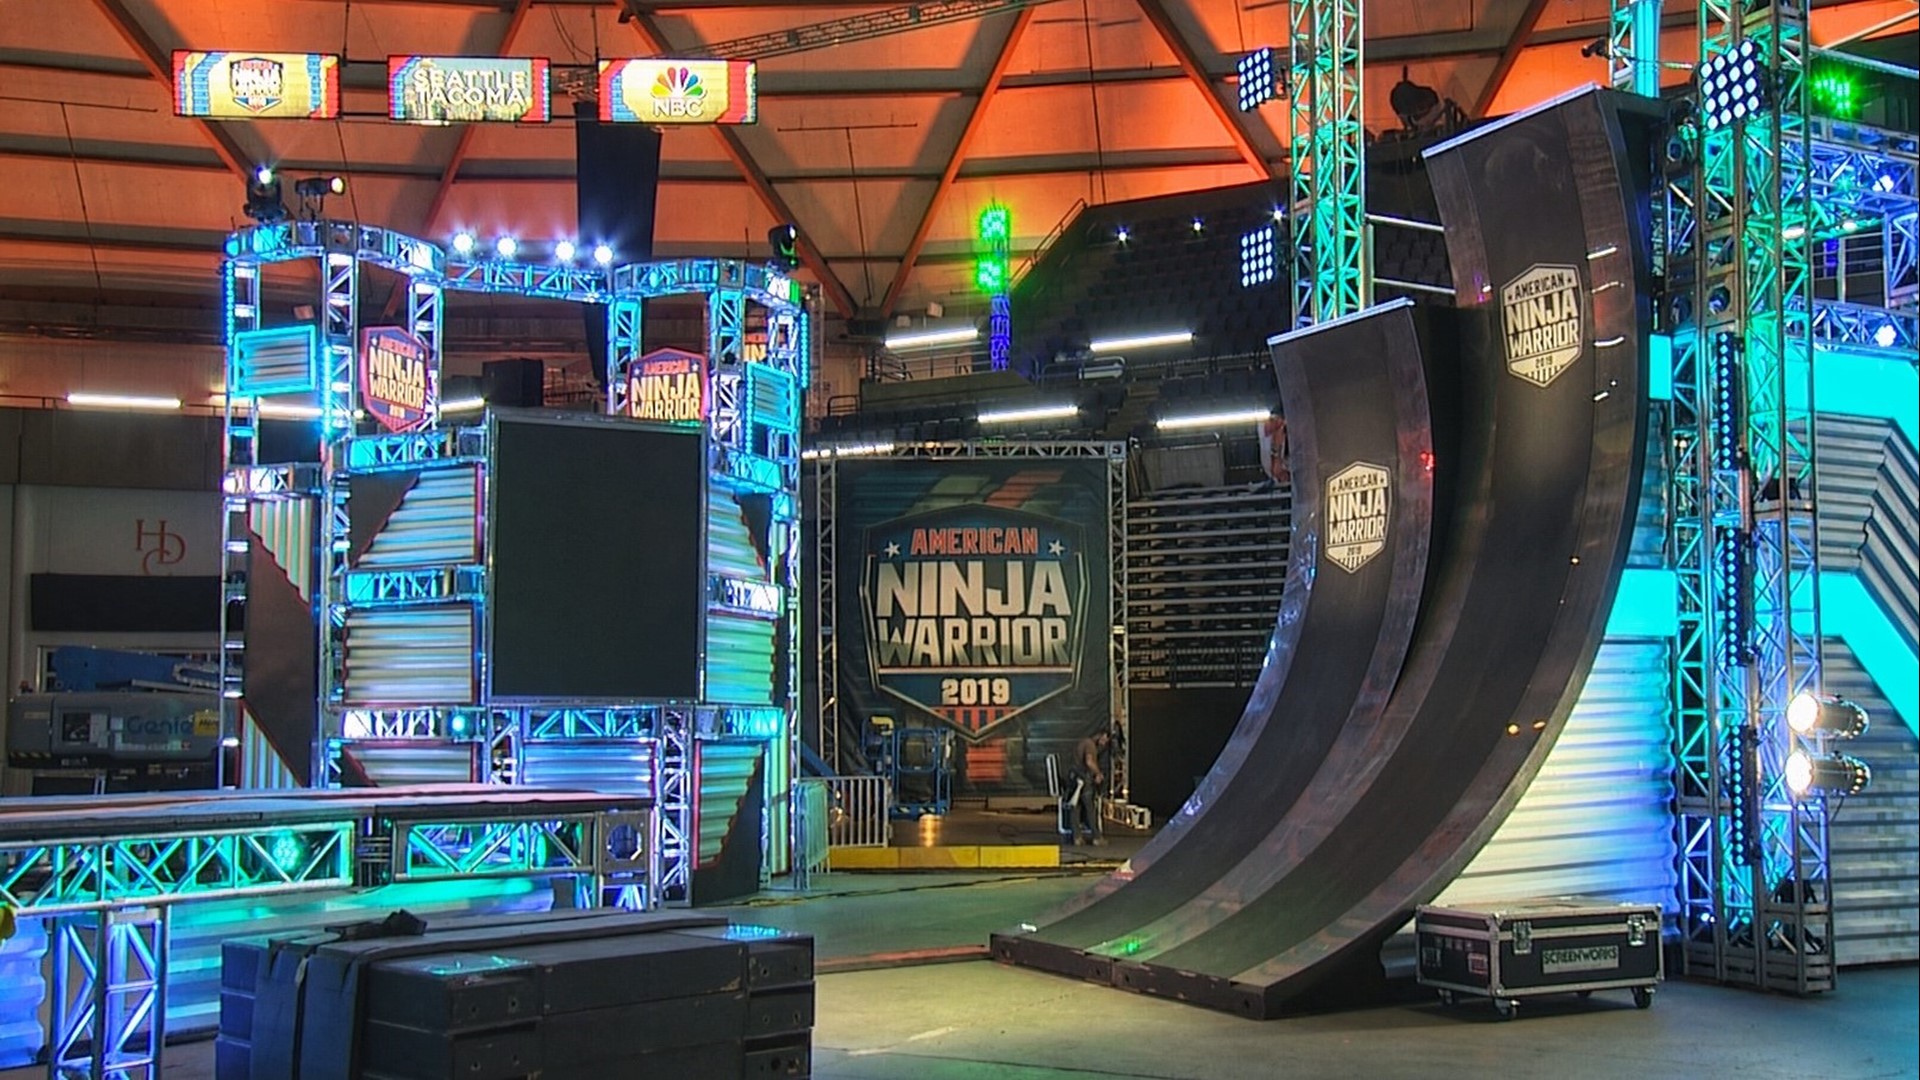 The show's first-ever stop in the PNW will also be their first indoor competition